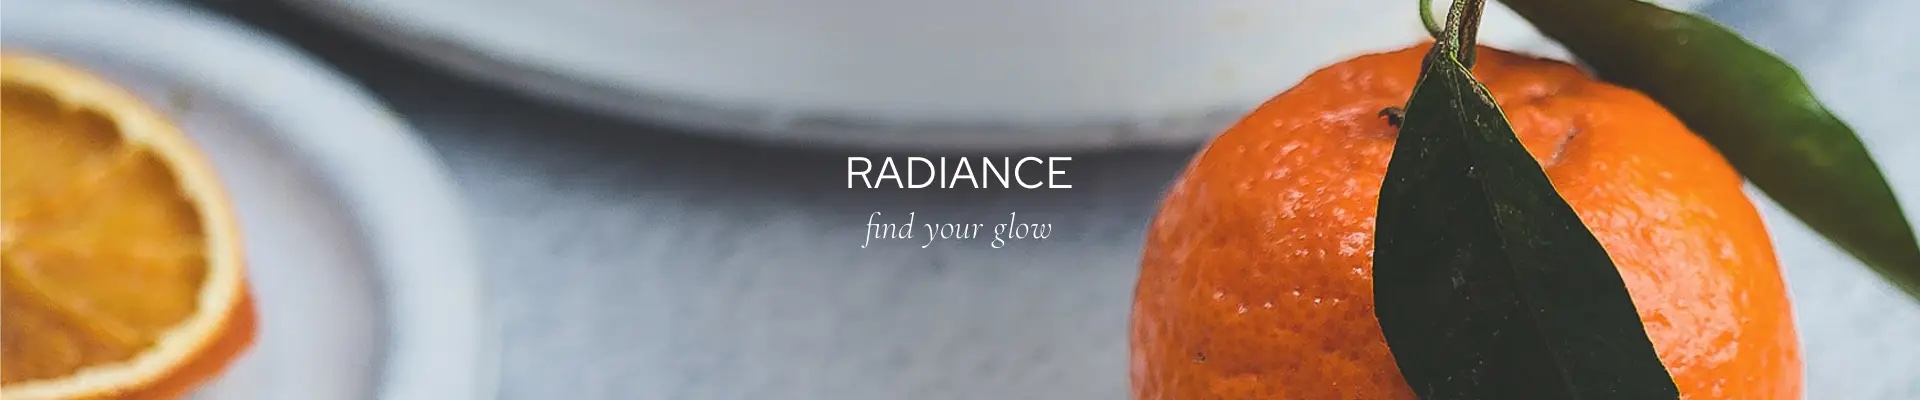 Radiance - Find your glow